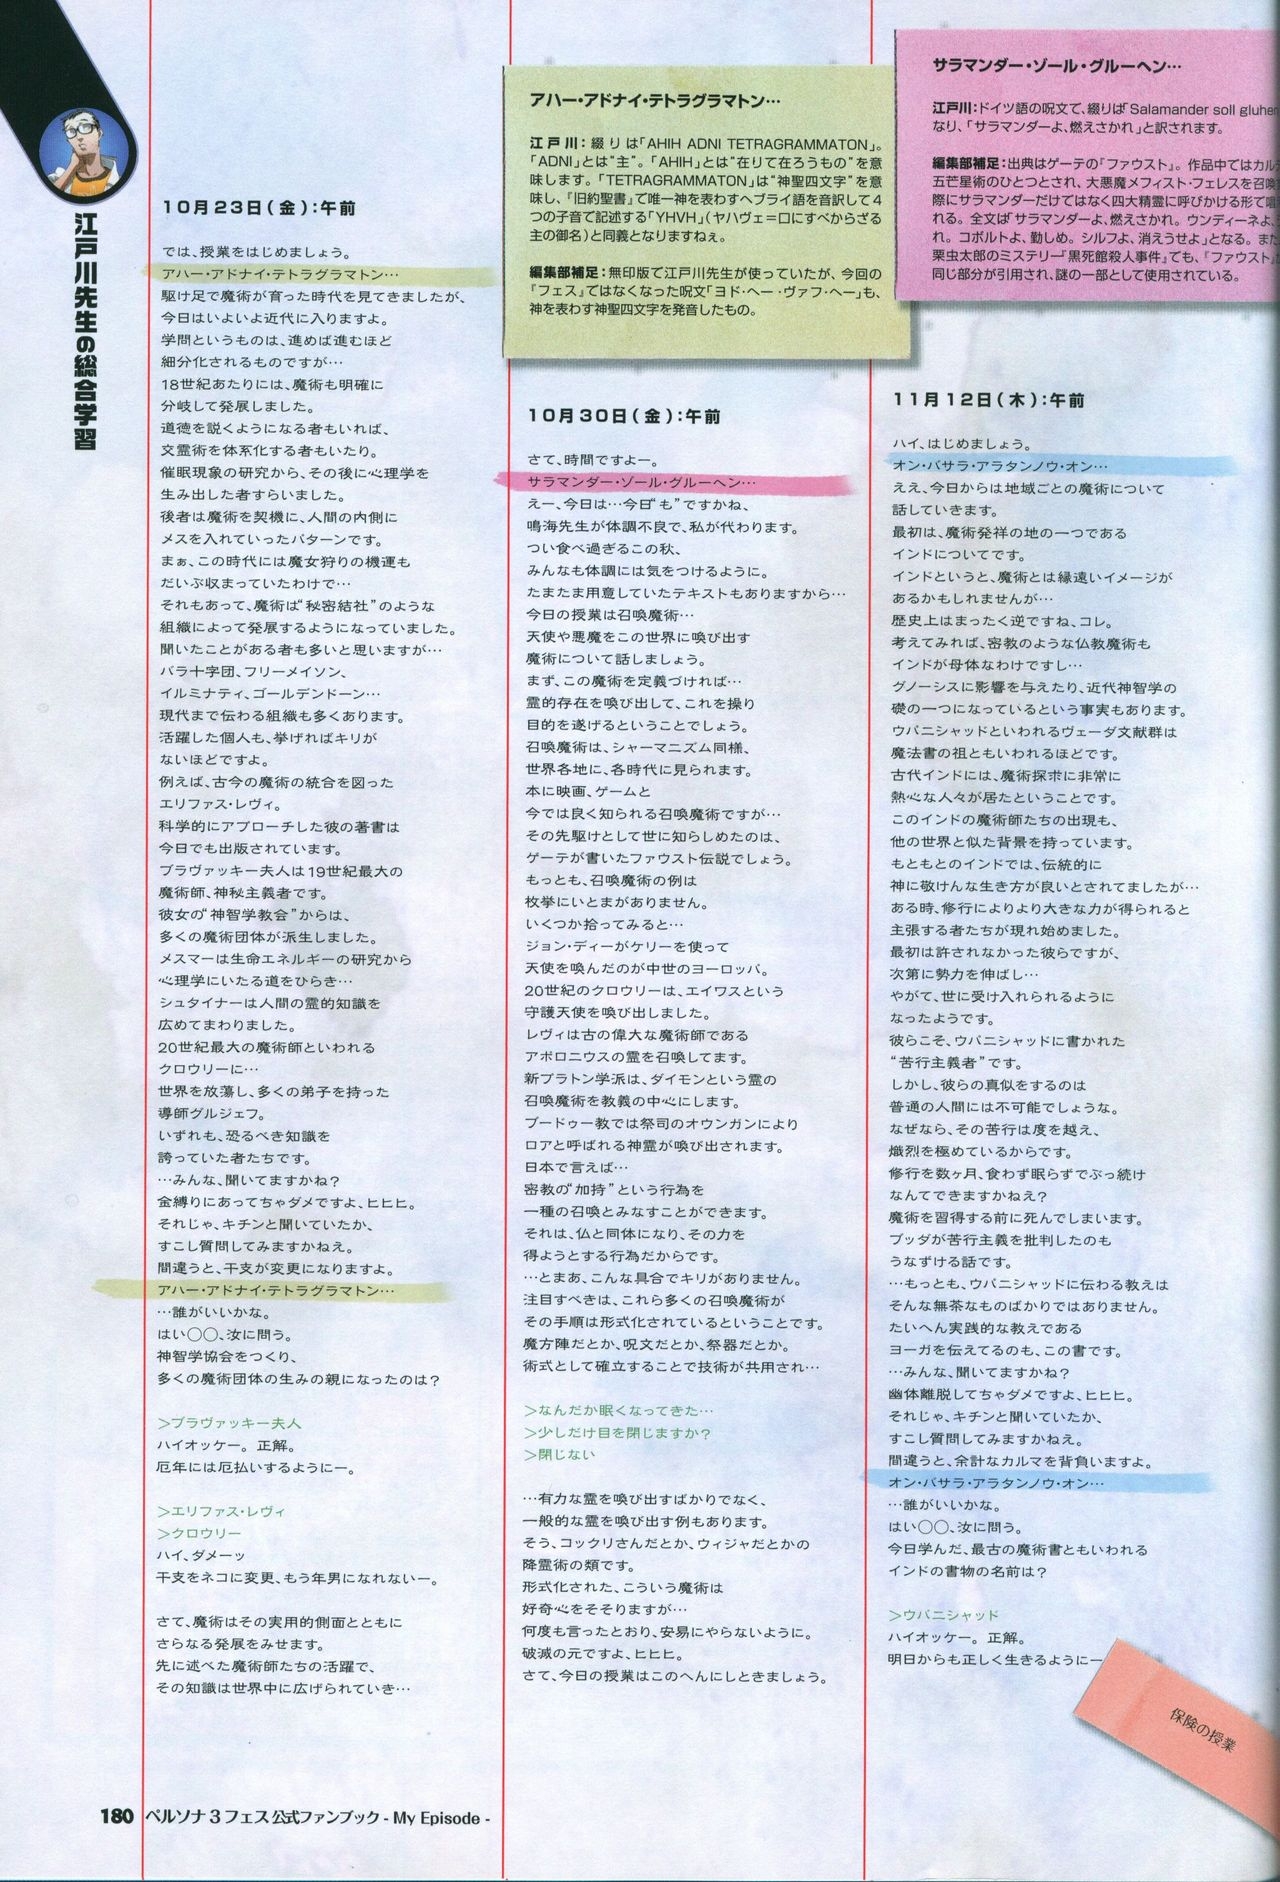 Persona 3 Fes Official Fan Book -My Episode- 181